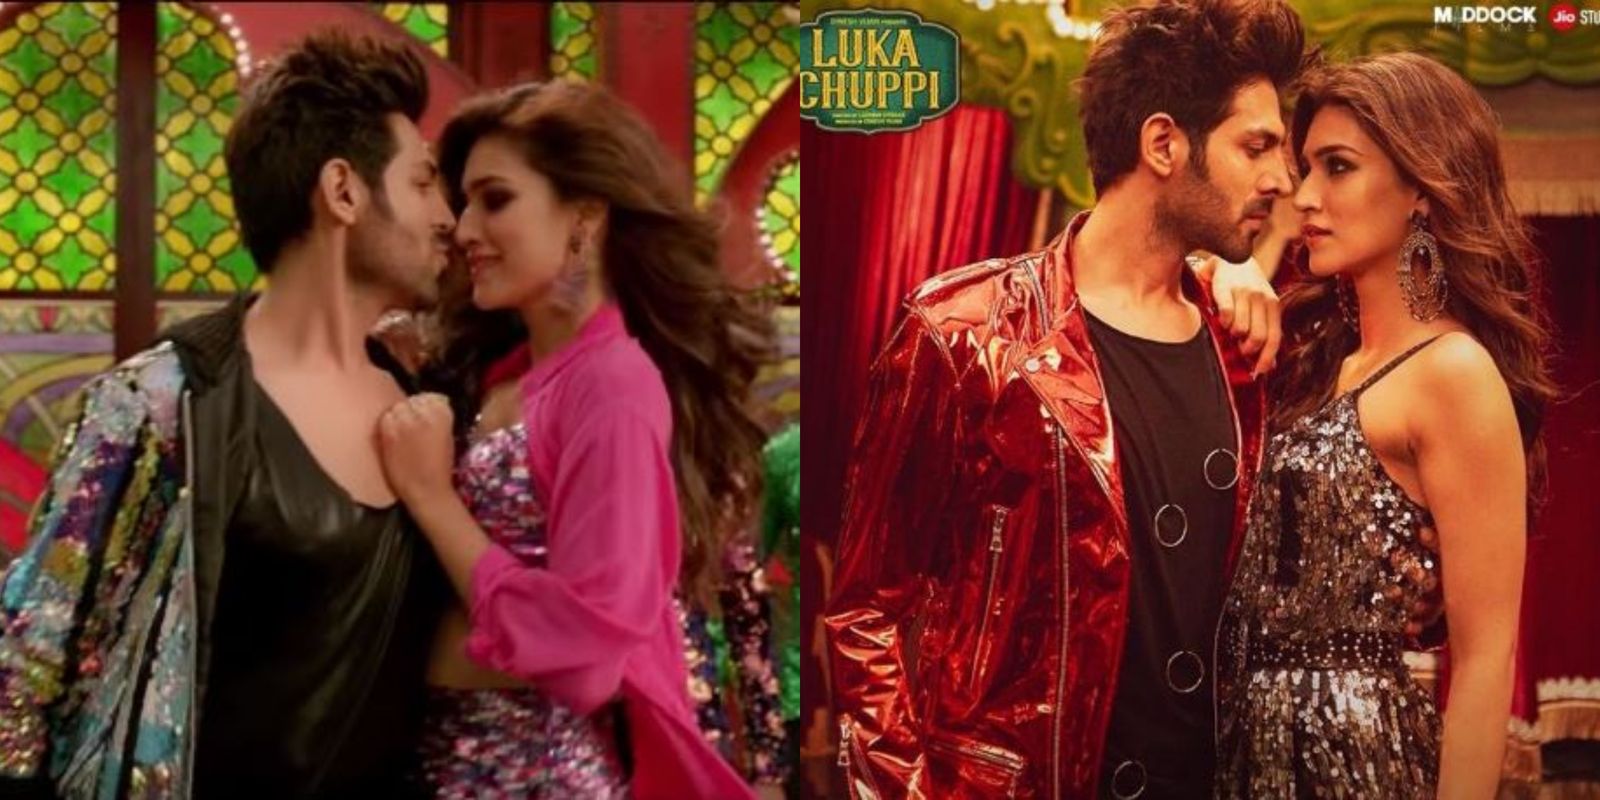 WATCH: Will The New Coca Cola Song From Luka Chuppi Have More Punch Or Fizz Out Completely?